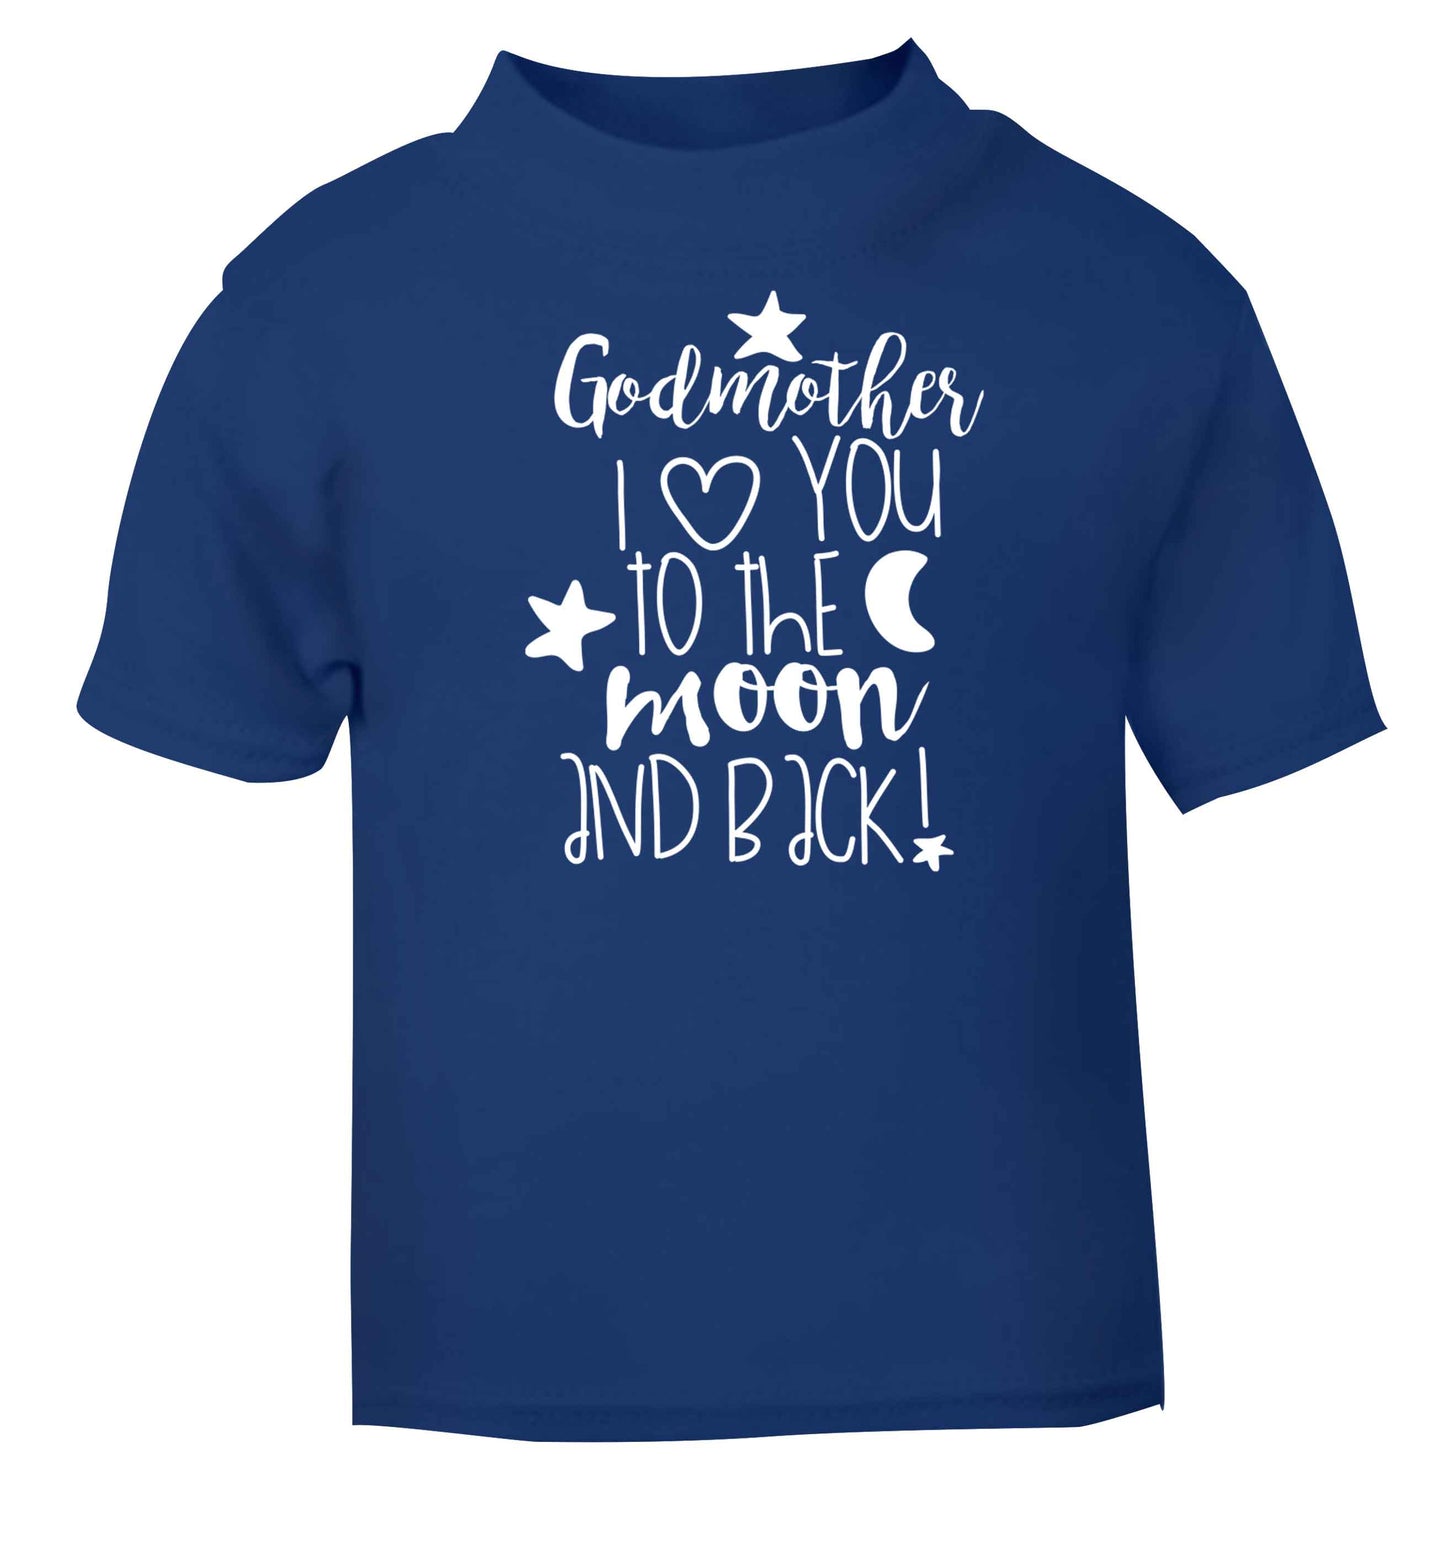 Godmother I love you to the moon and back blue baby toddler Tshirt 2 Years